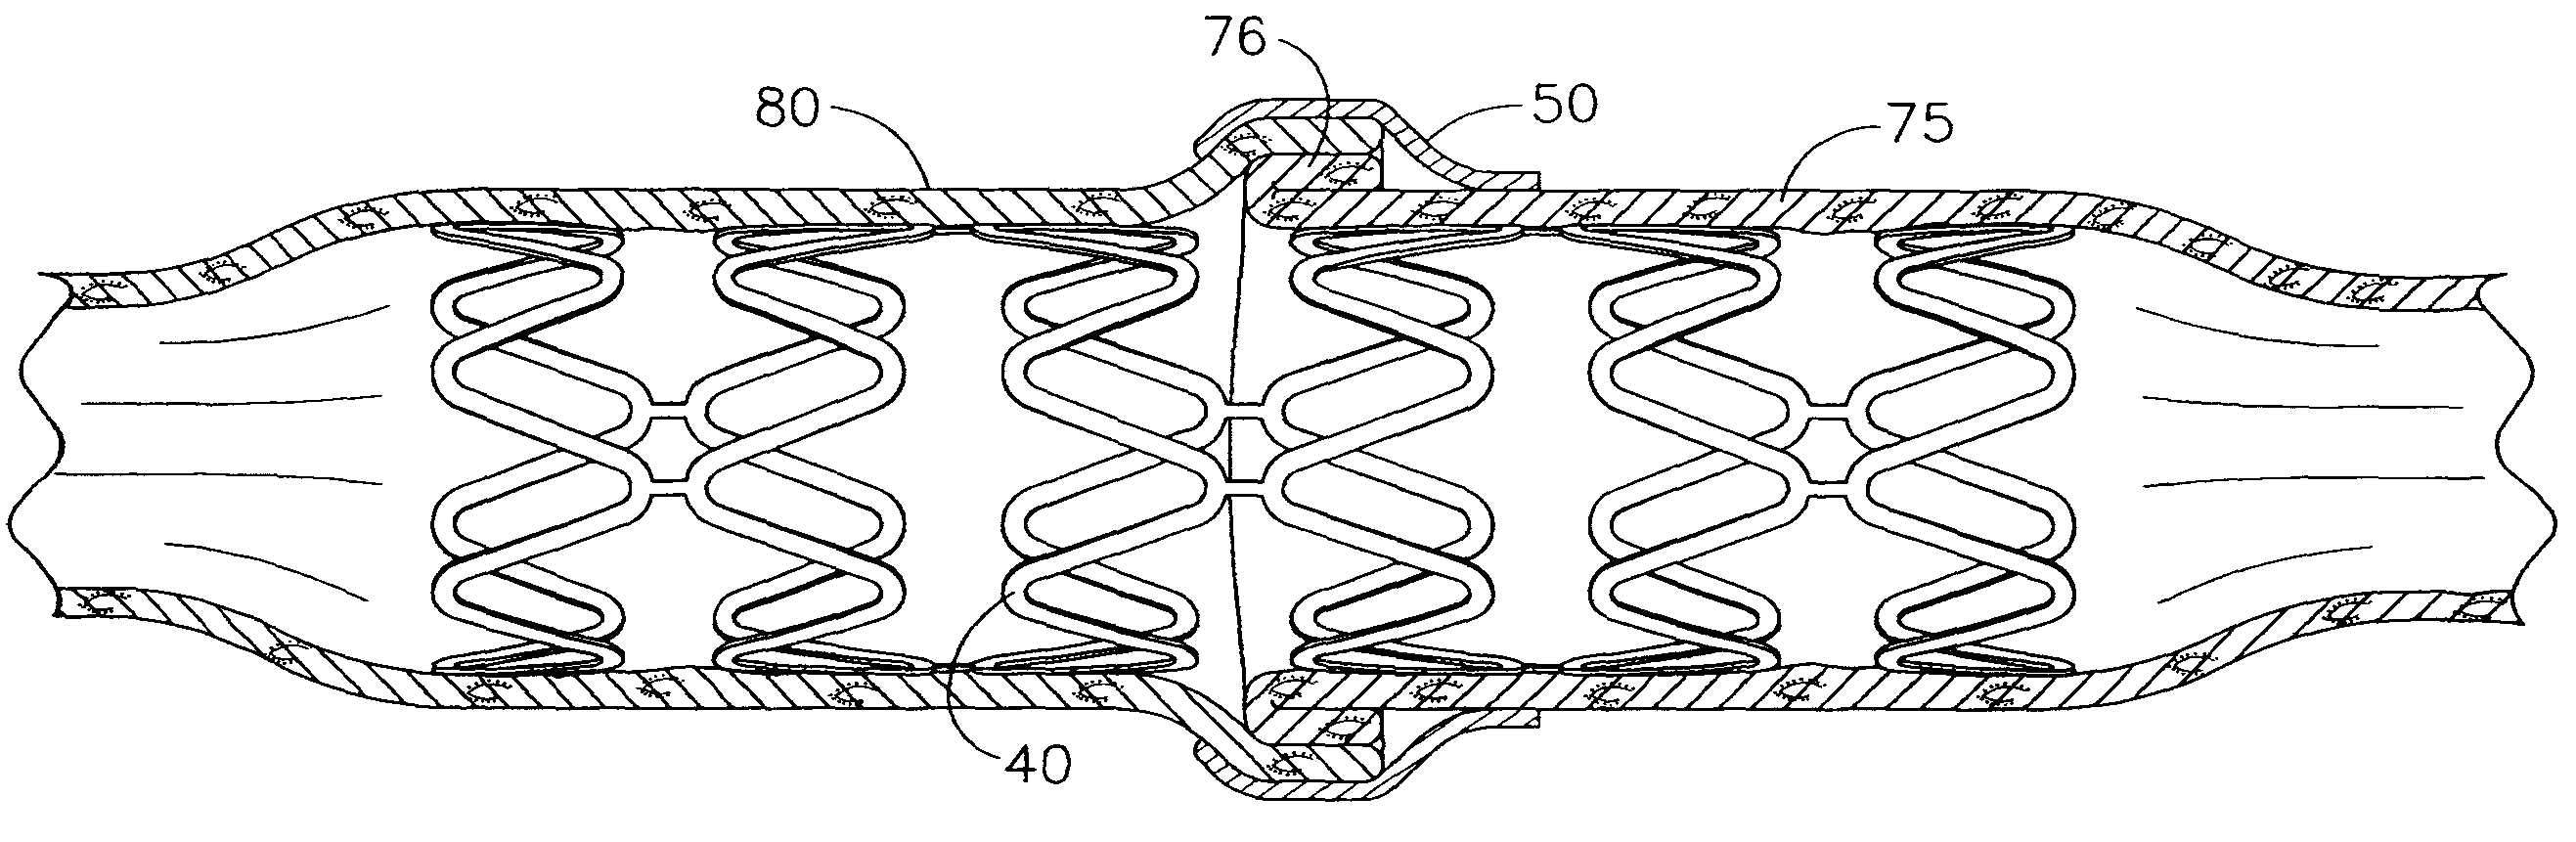 Method of performing an end-to-end anastomosis using a stent and an adhesive